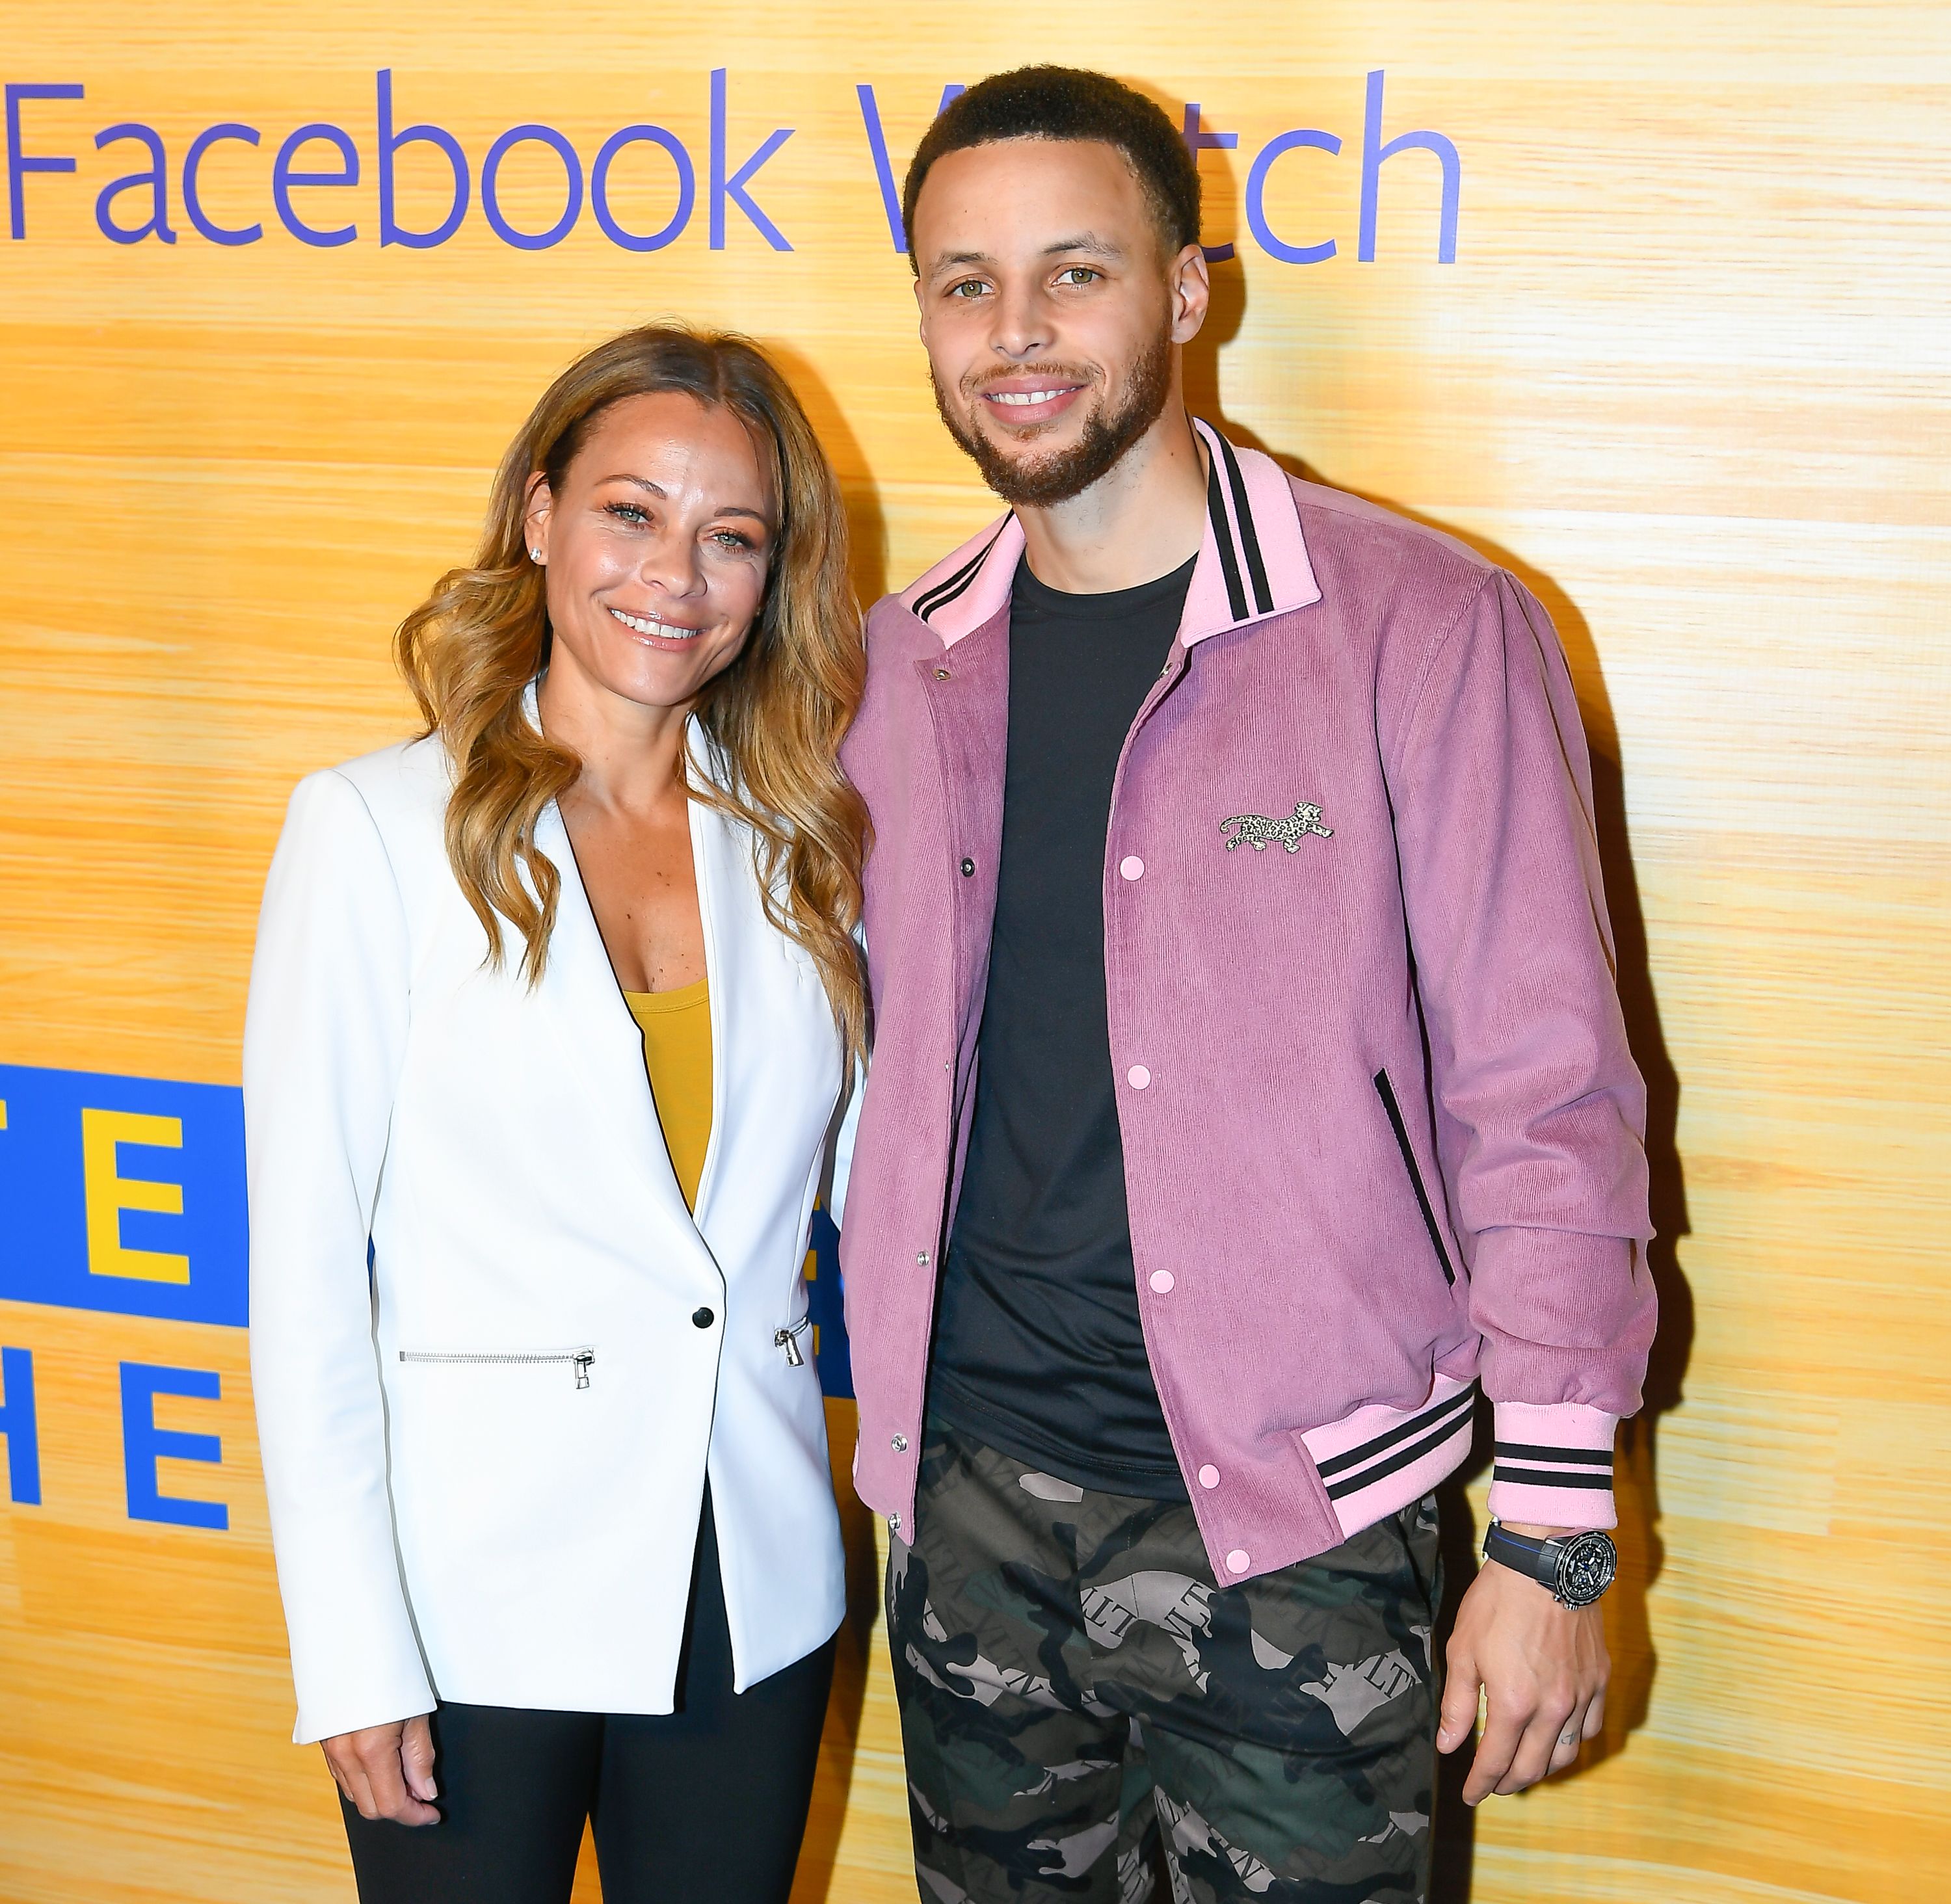 Sonya Curry and NBA Player Stephen Curry of the Golden State Warriors| Photo: Getty Images)